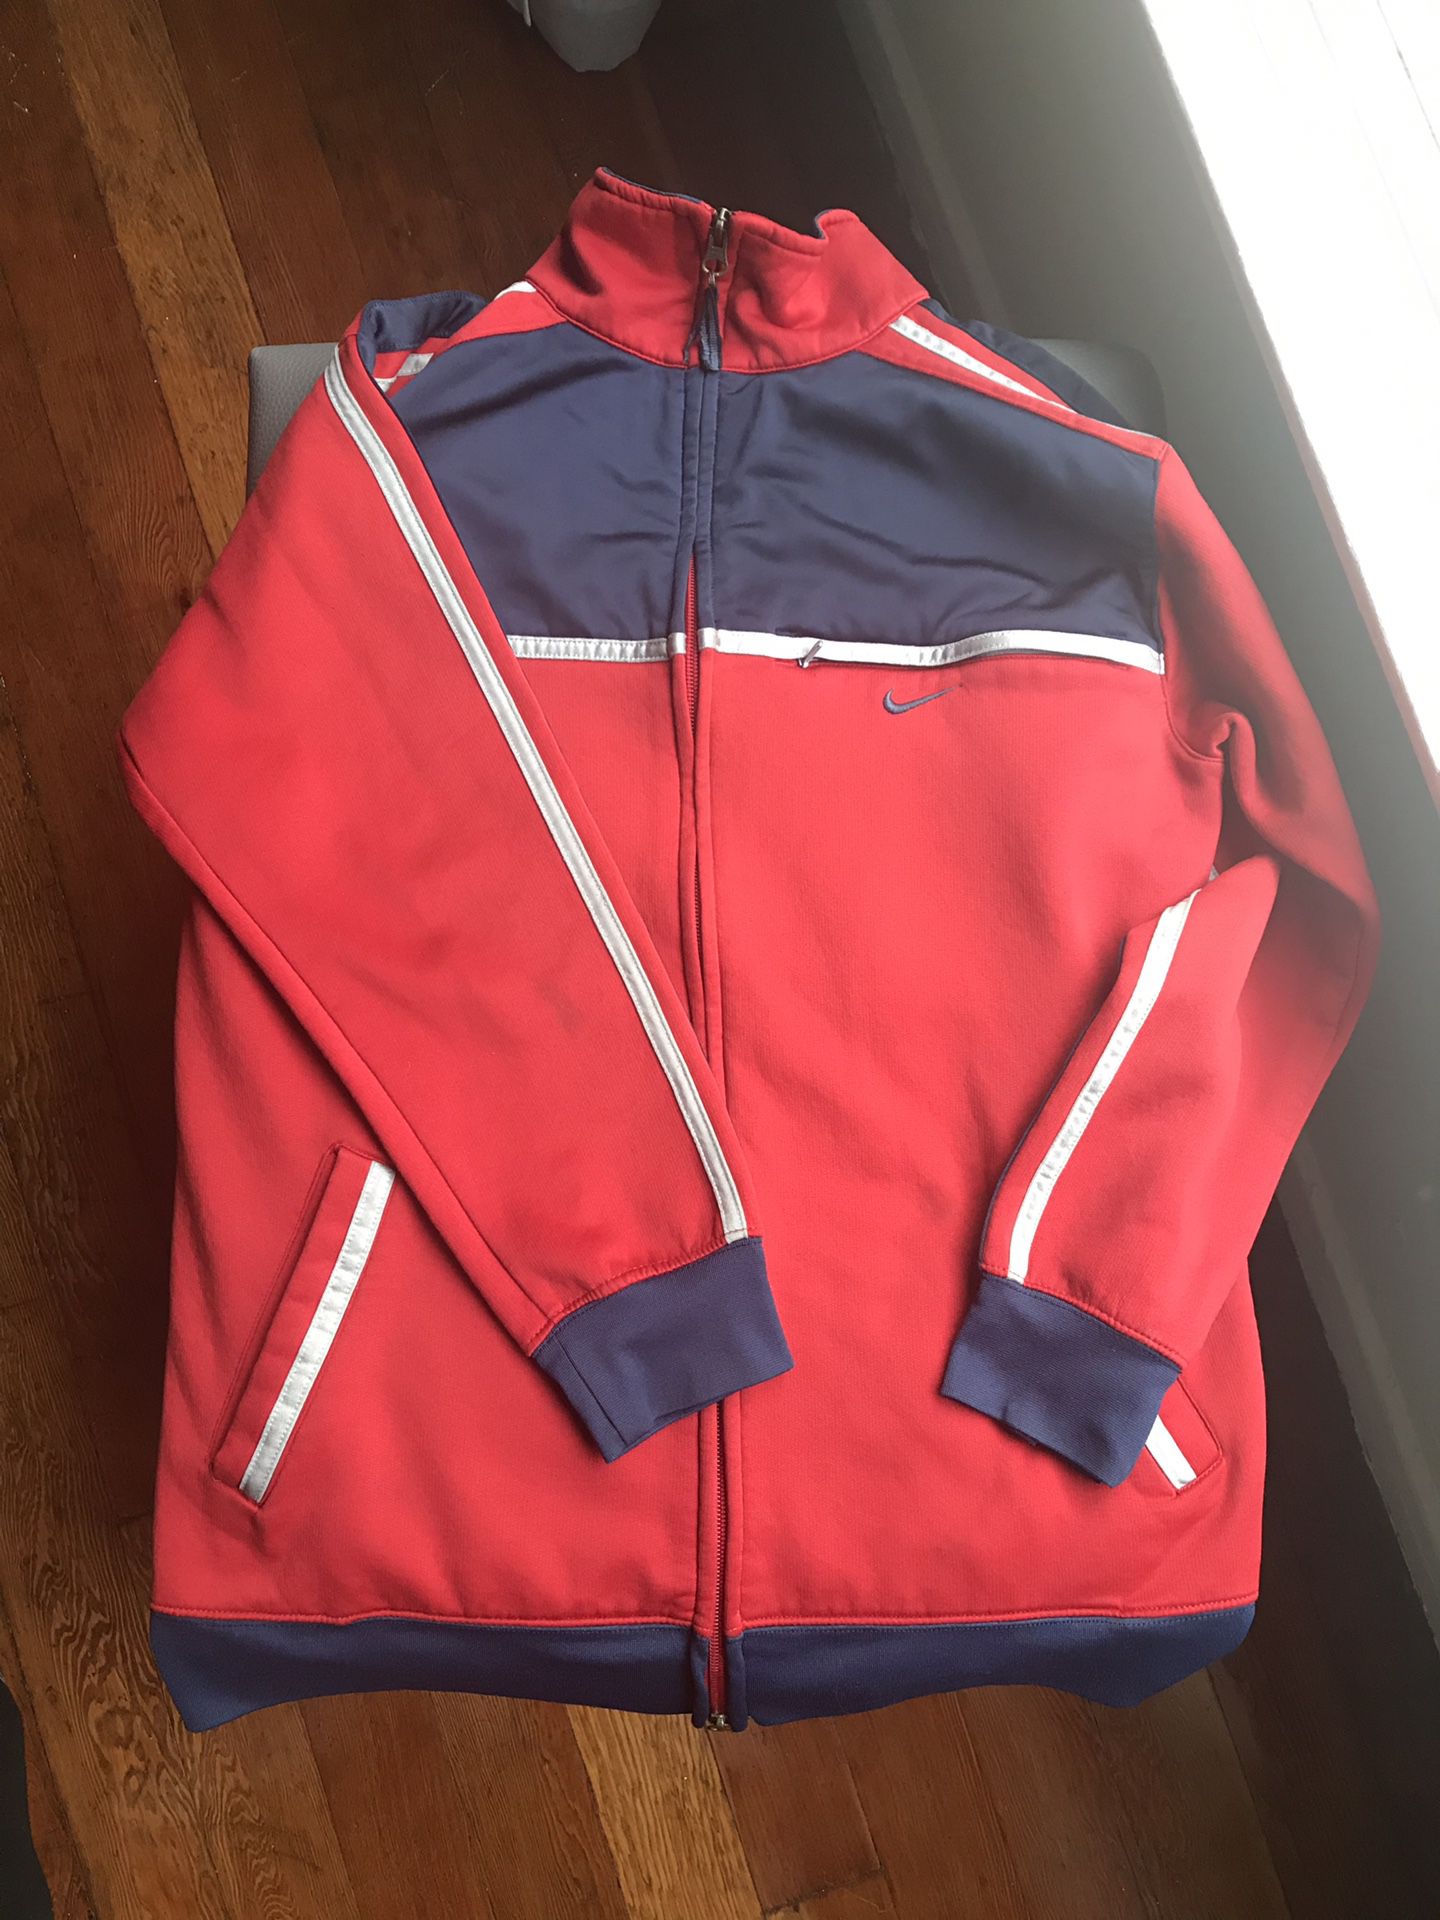 Kids Nike Track Jacket Suit Top Zip Up Sweater Red Navy Grey Pinstripes Size Large